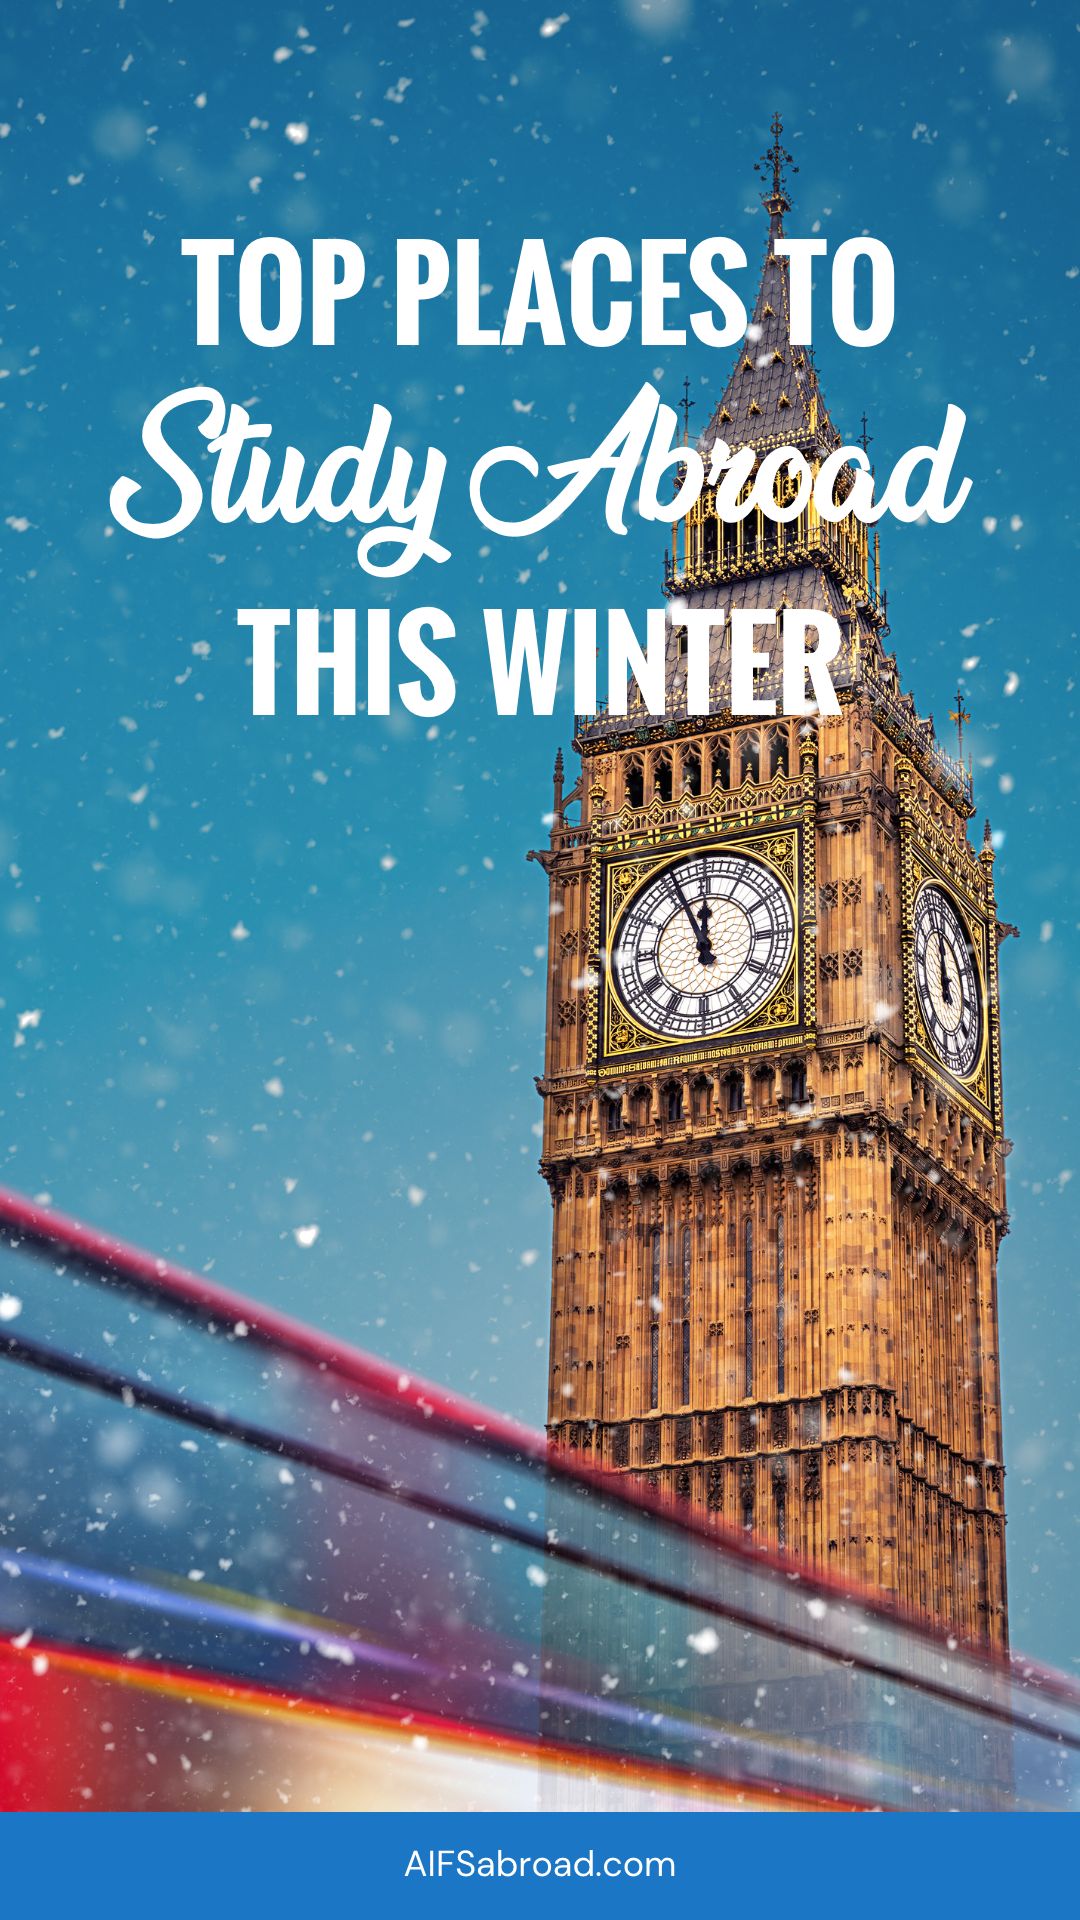 Pin image: London, England with snow in the background and text overlay saying "Top Places to Study Abroad this Winter"